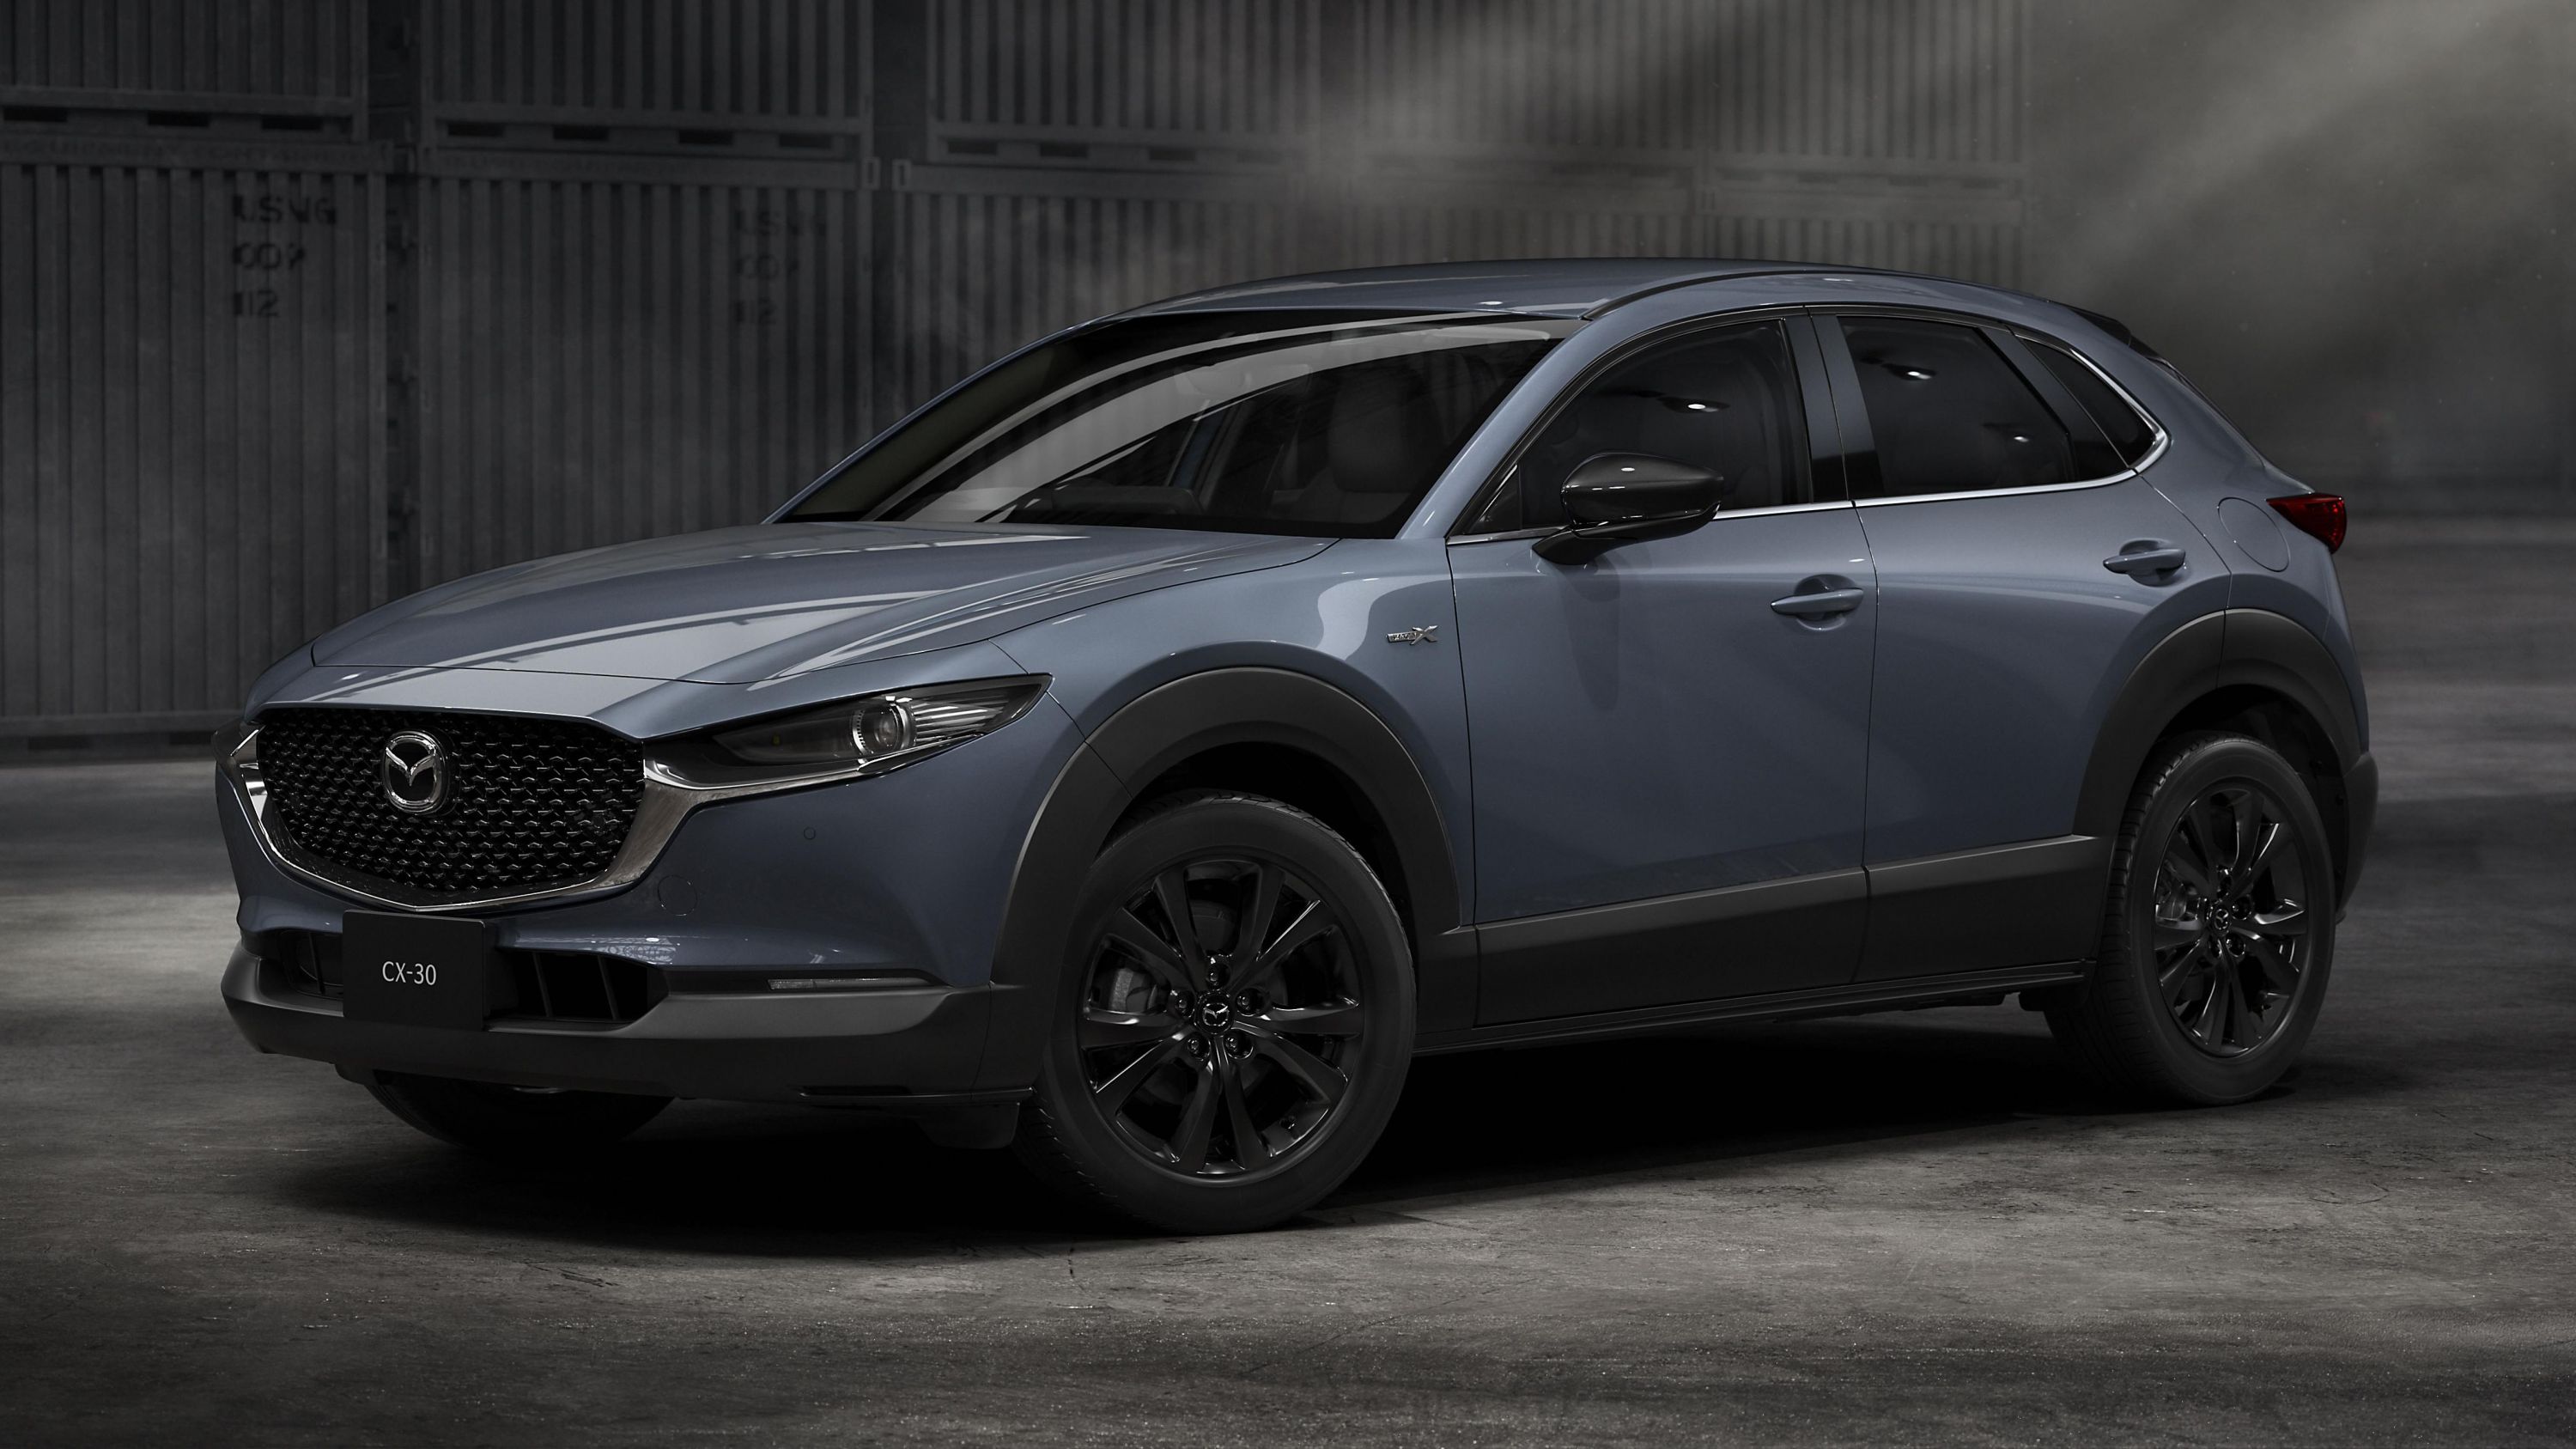 South Africa next? Tech upgraded Mazda CX-3 debuts in Japan